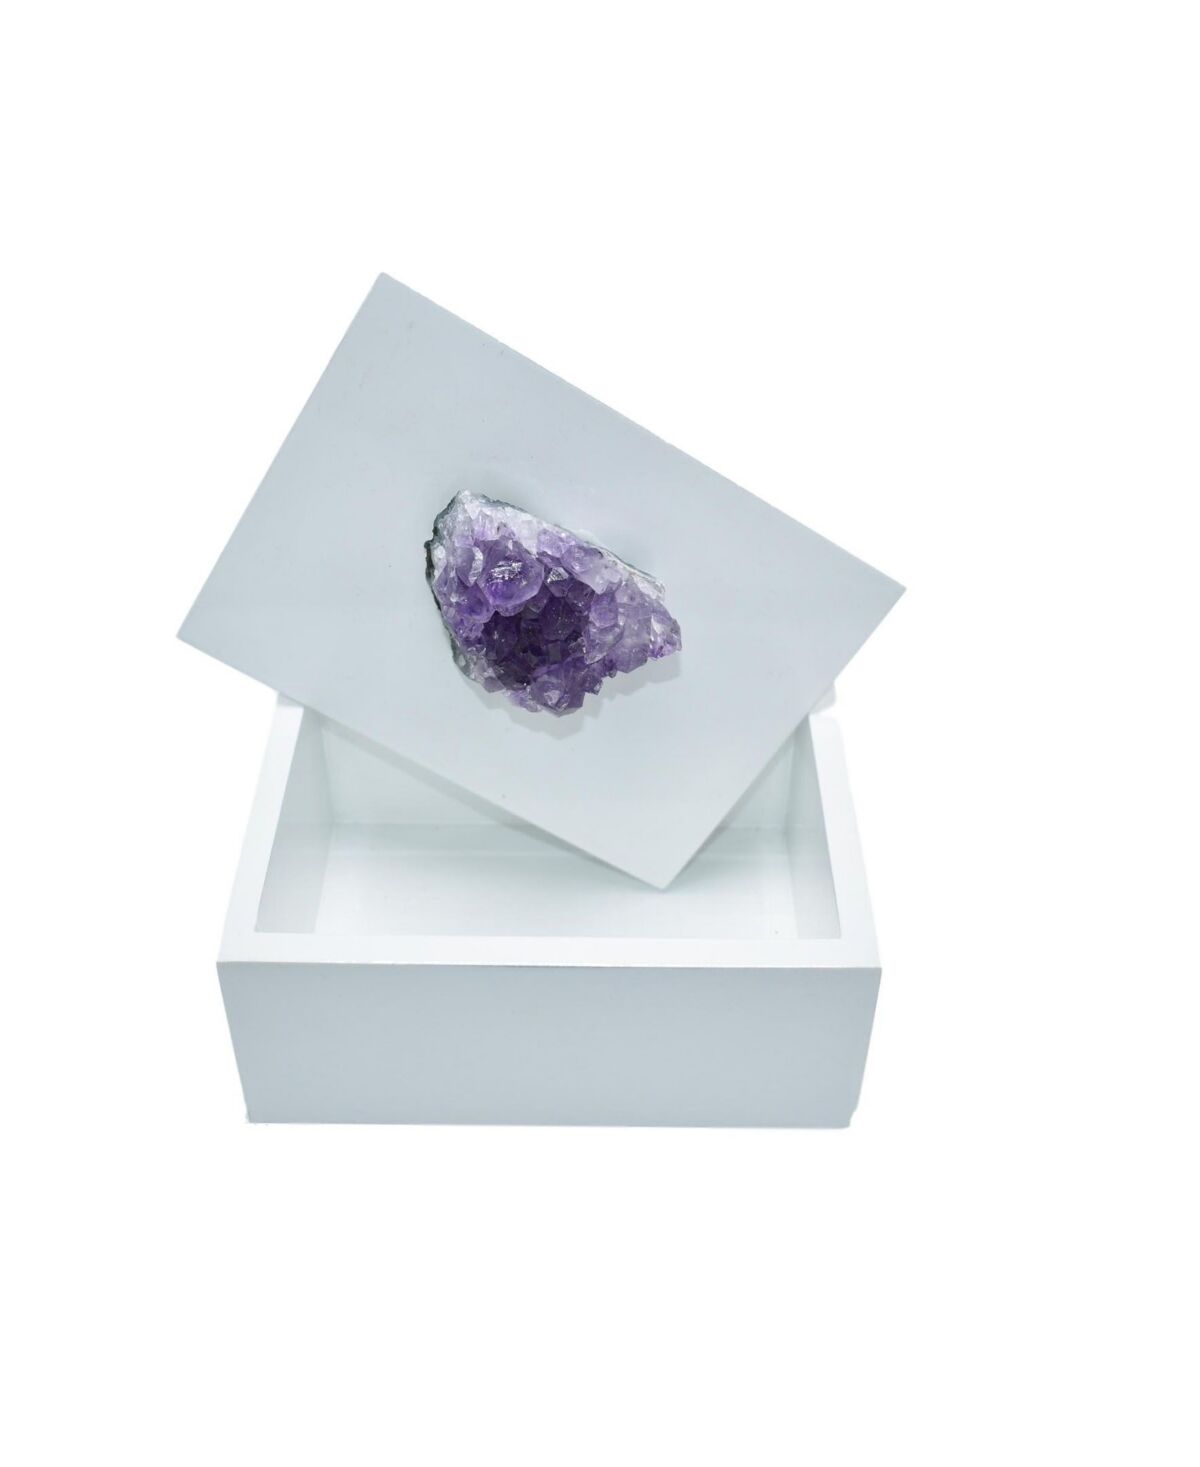 Nature's Decorations - Jewelry Box with Amethyst - White